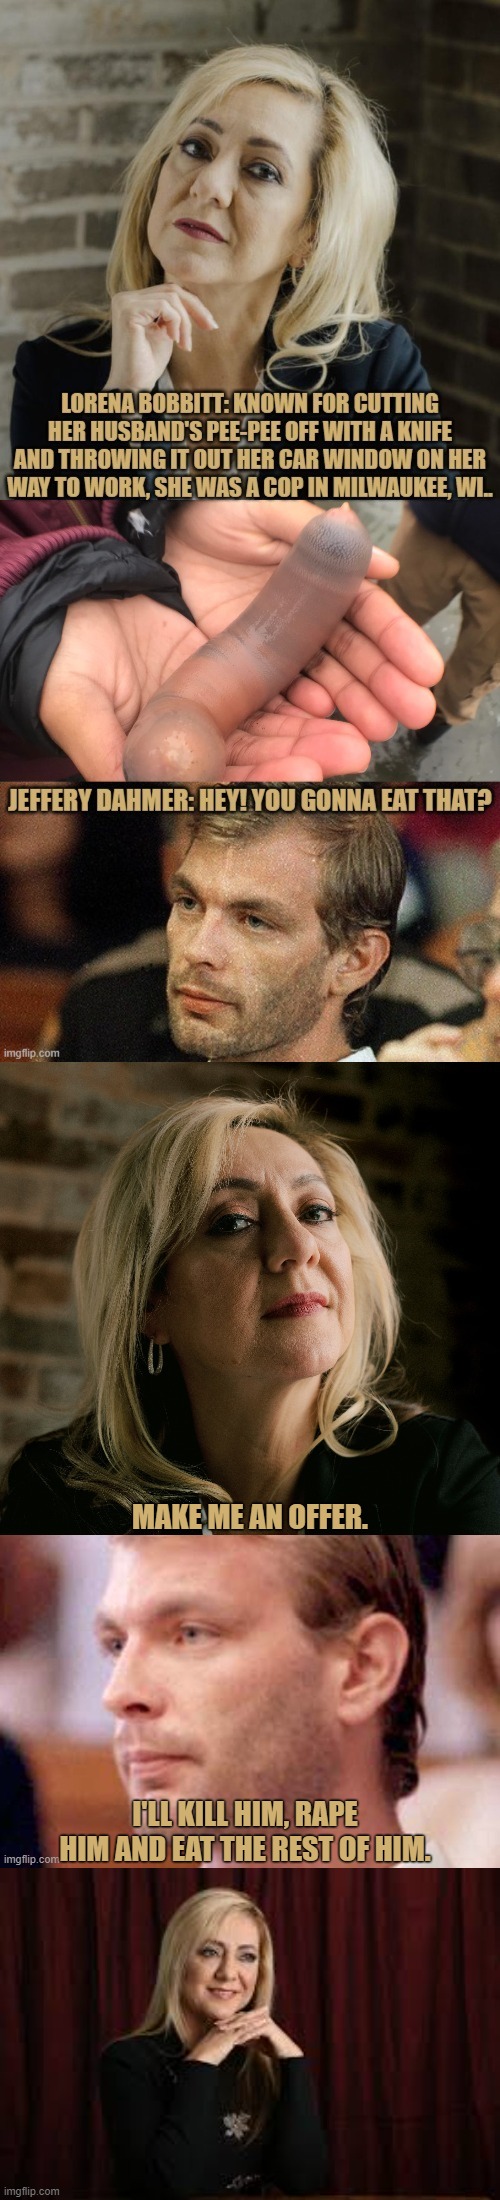 Lorena Bobbitt & Jeffery Dahmer: One Day In Milwaukee, WI. USA, | MAKE ME AN OFFER. I'LL KILL HIM, RAPE HIM AND EAT THE REST OF HIM. | image tagged in lorena bobbitt memes,jeffery dahmer memes | made w/ Imgflip meme maker